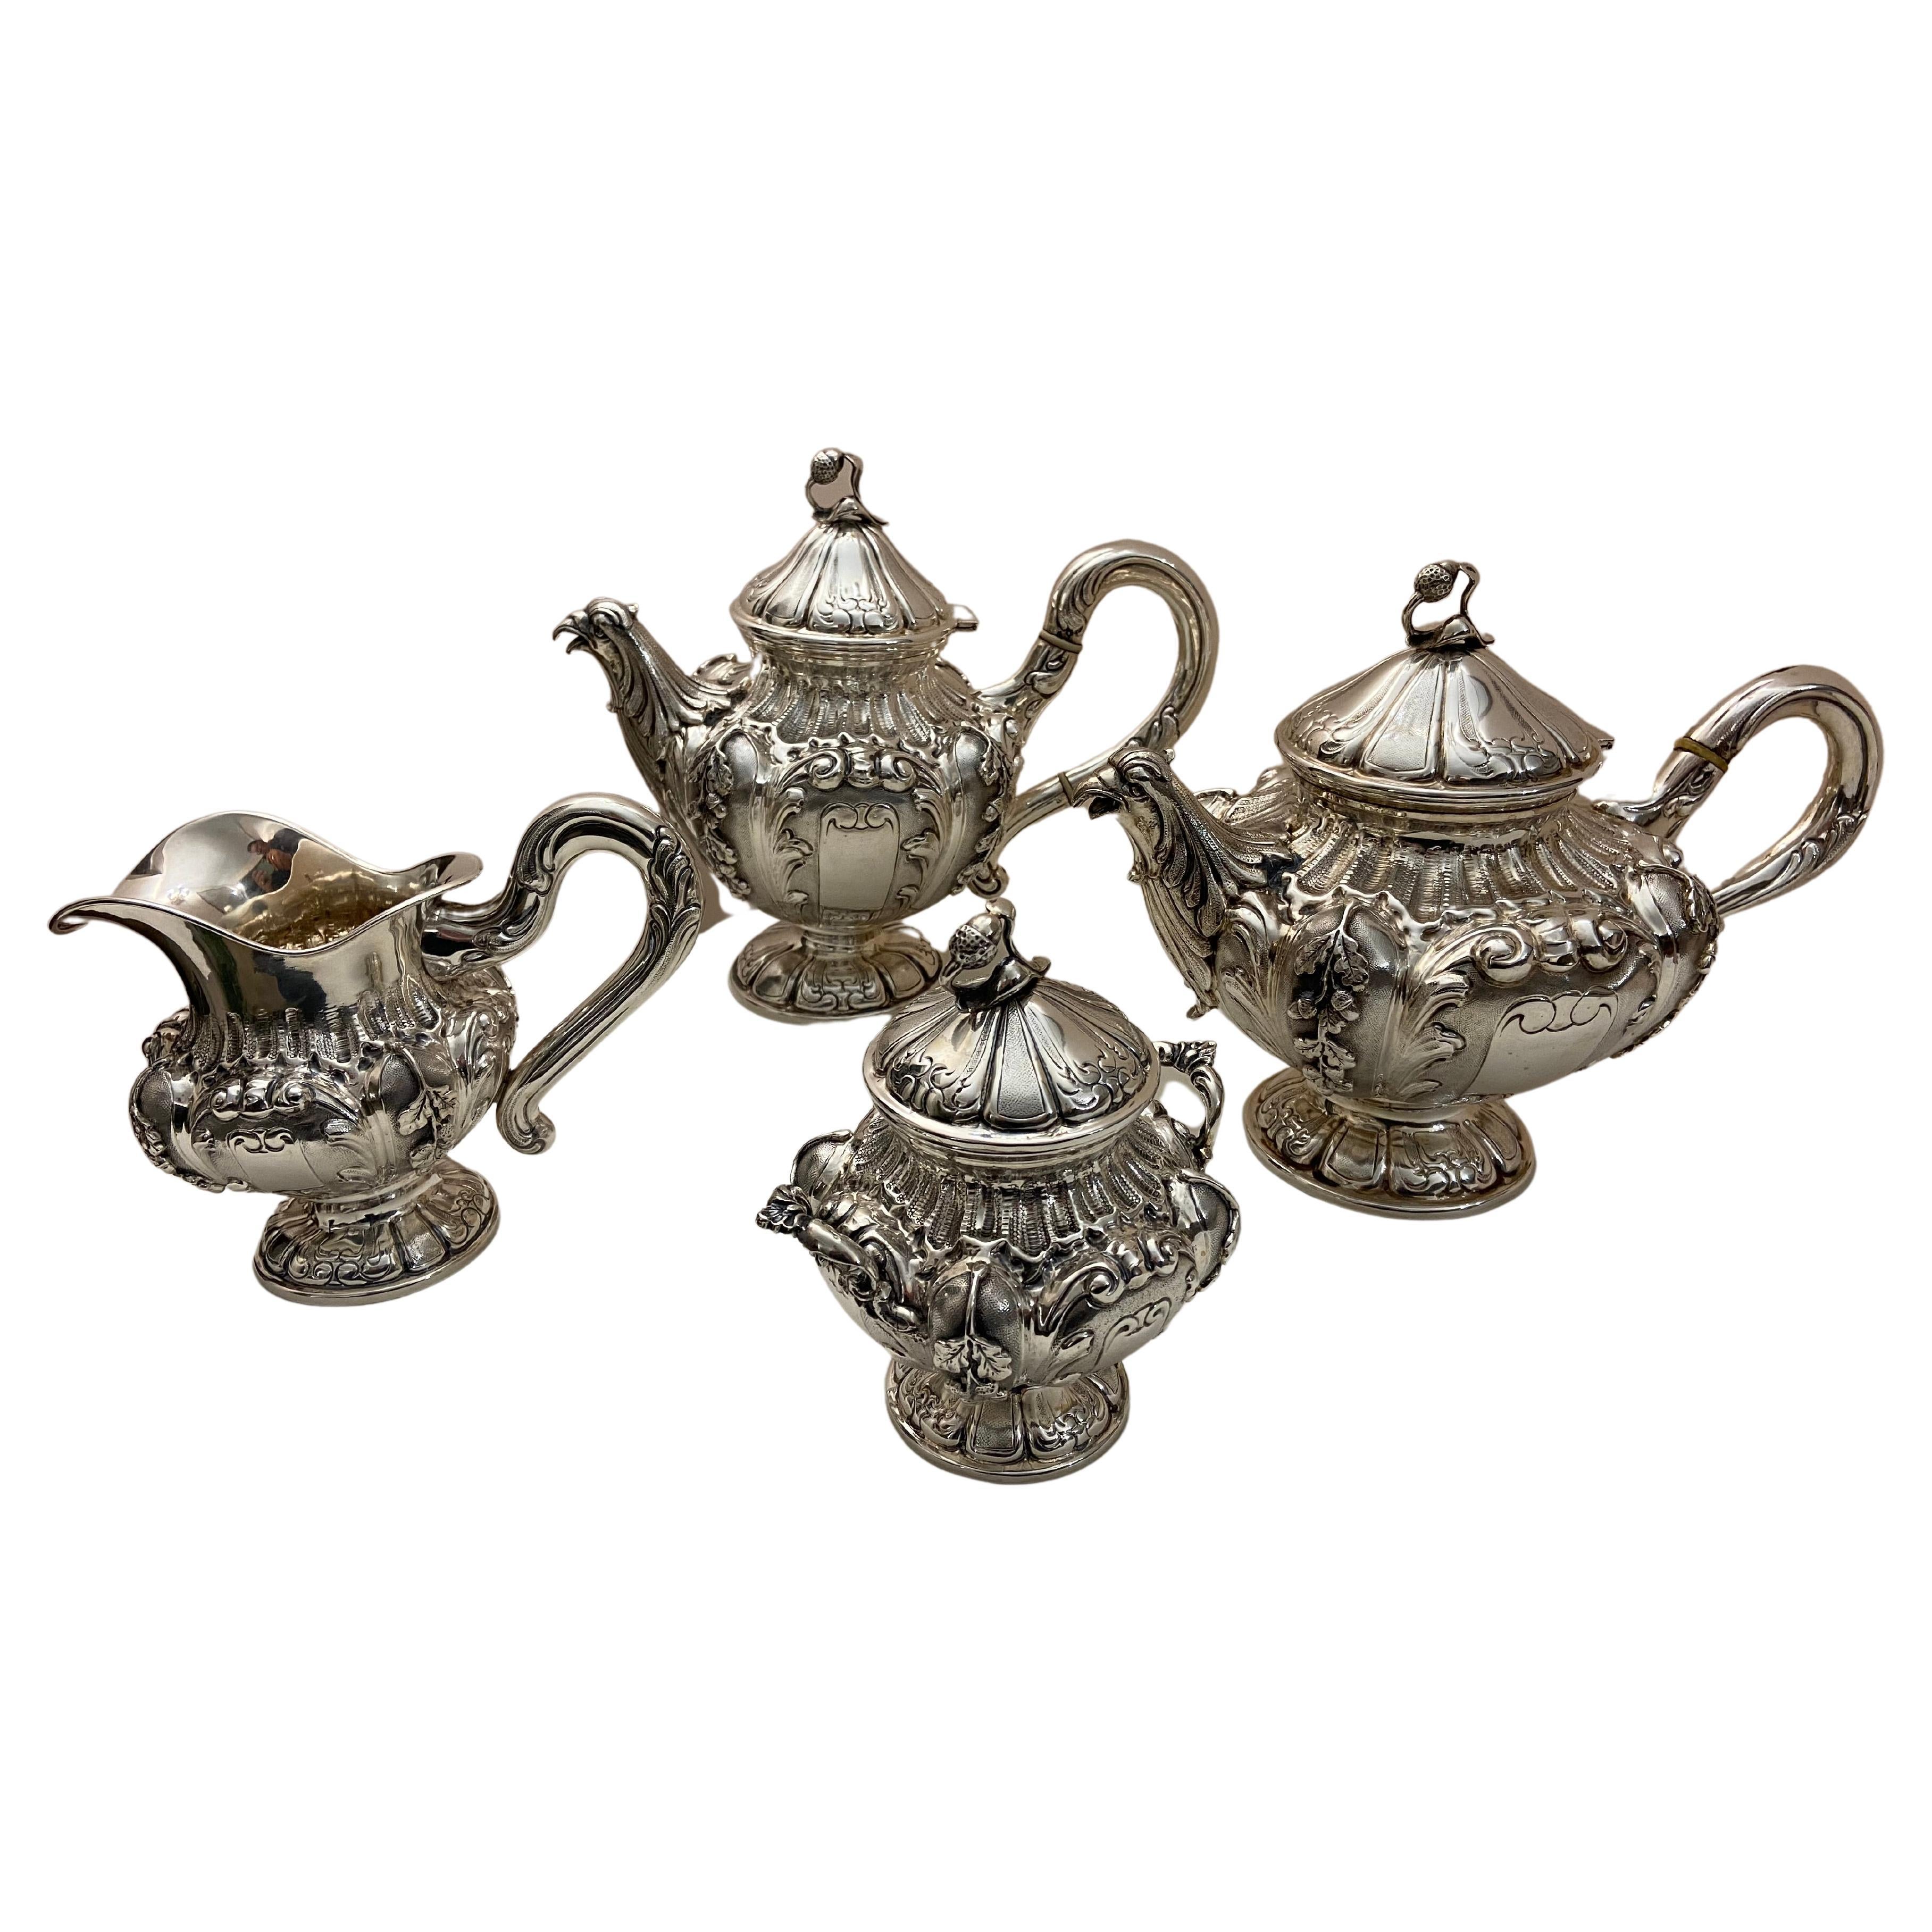 4 Pieces 800 Silver Service For Sale